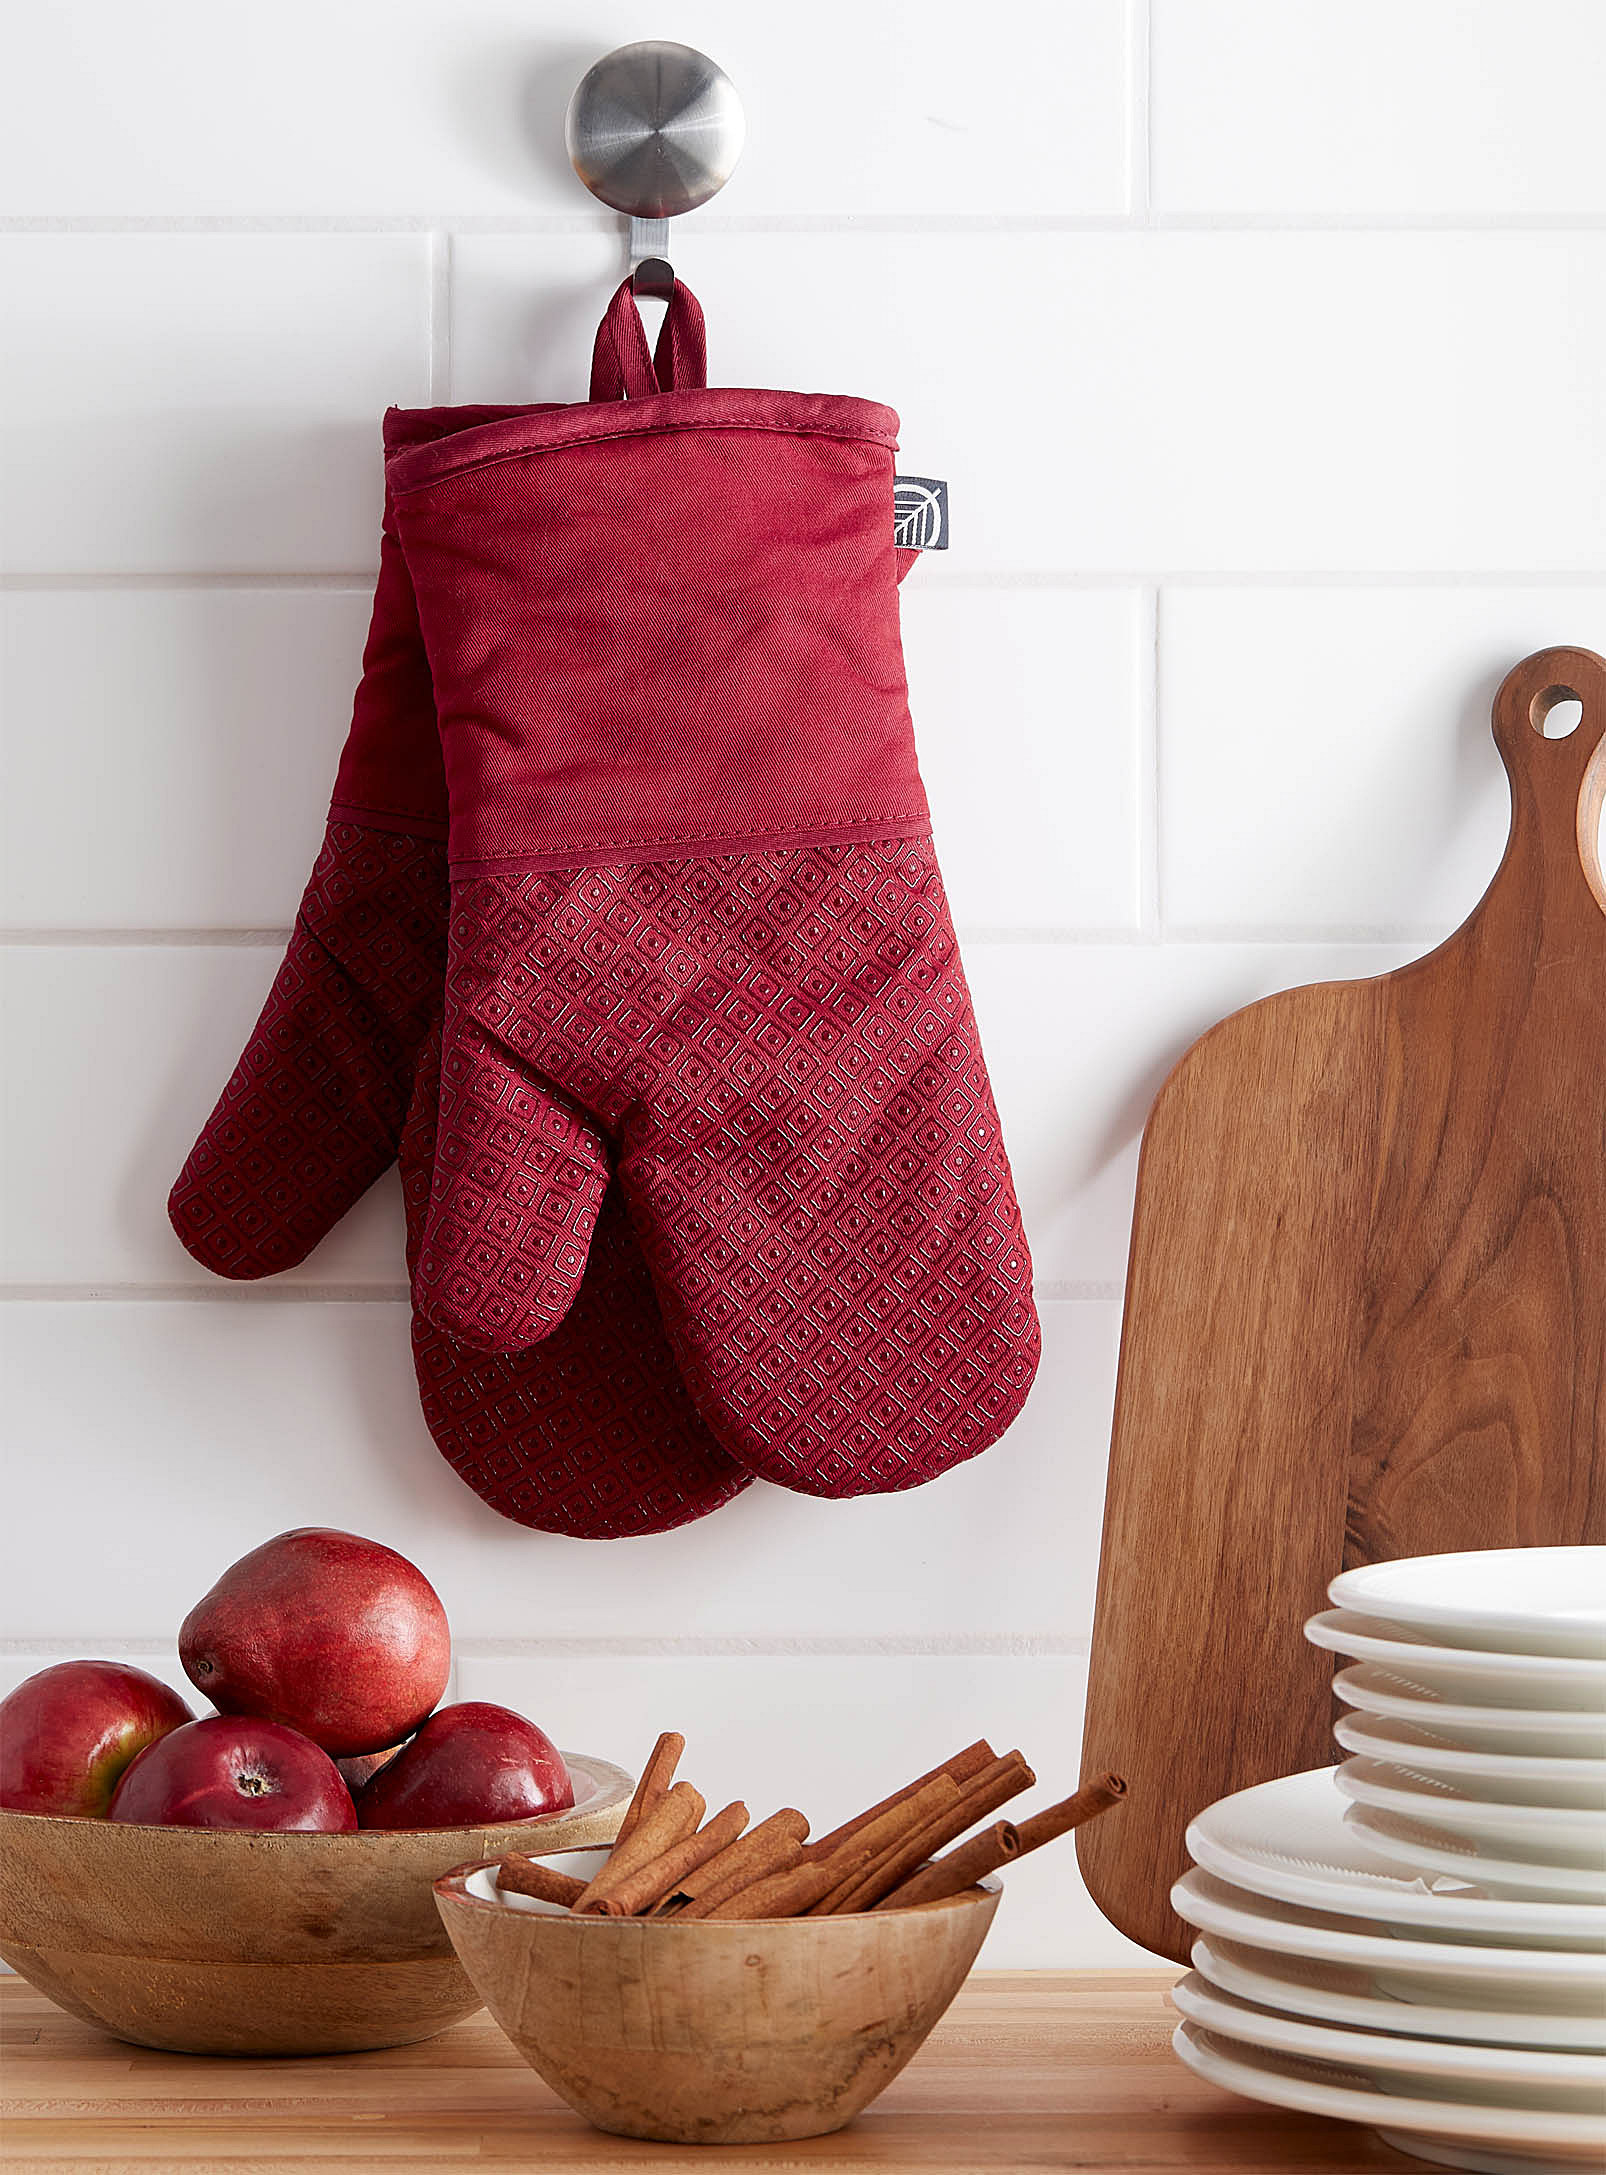 A pair of oven mitts hanging from the wall